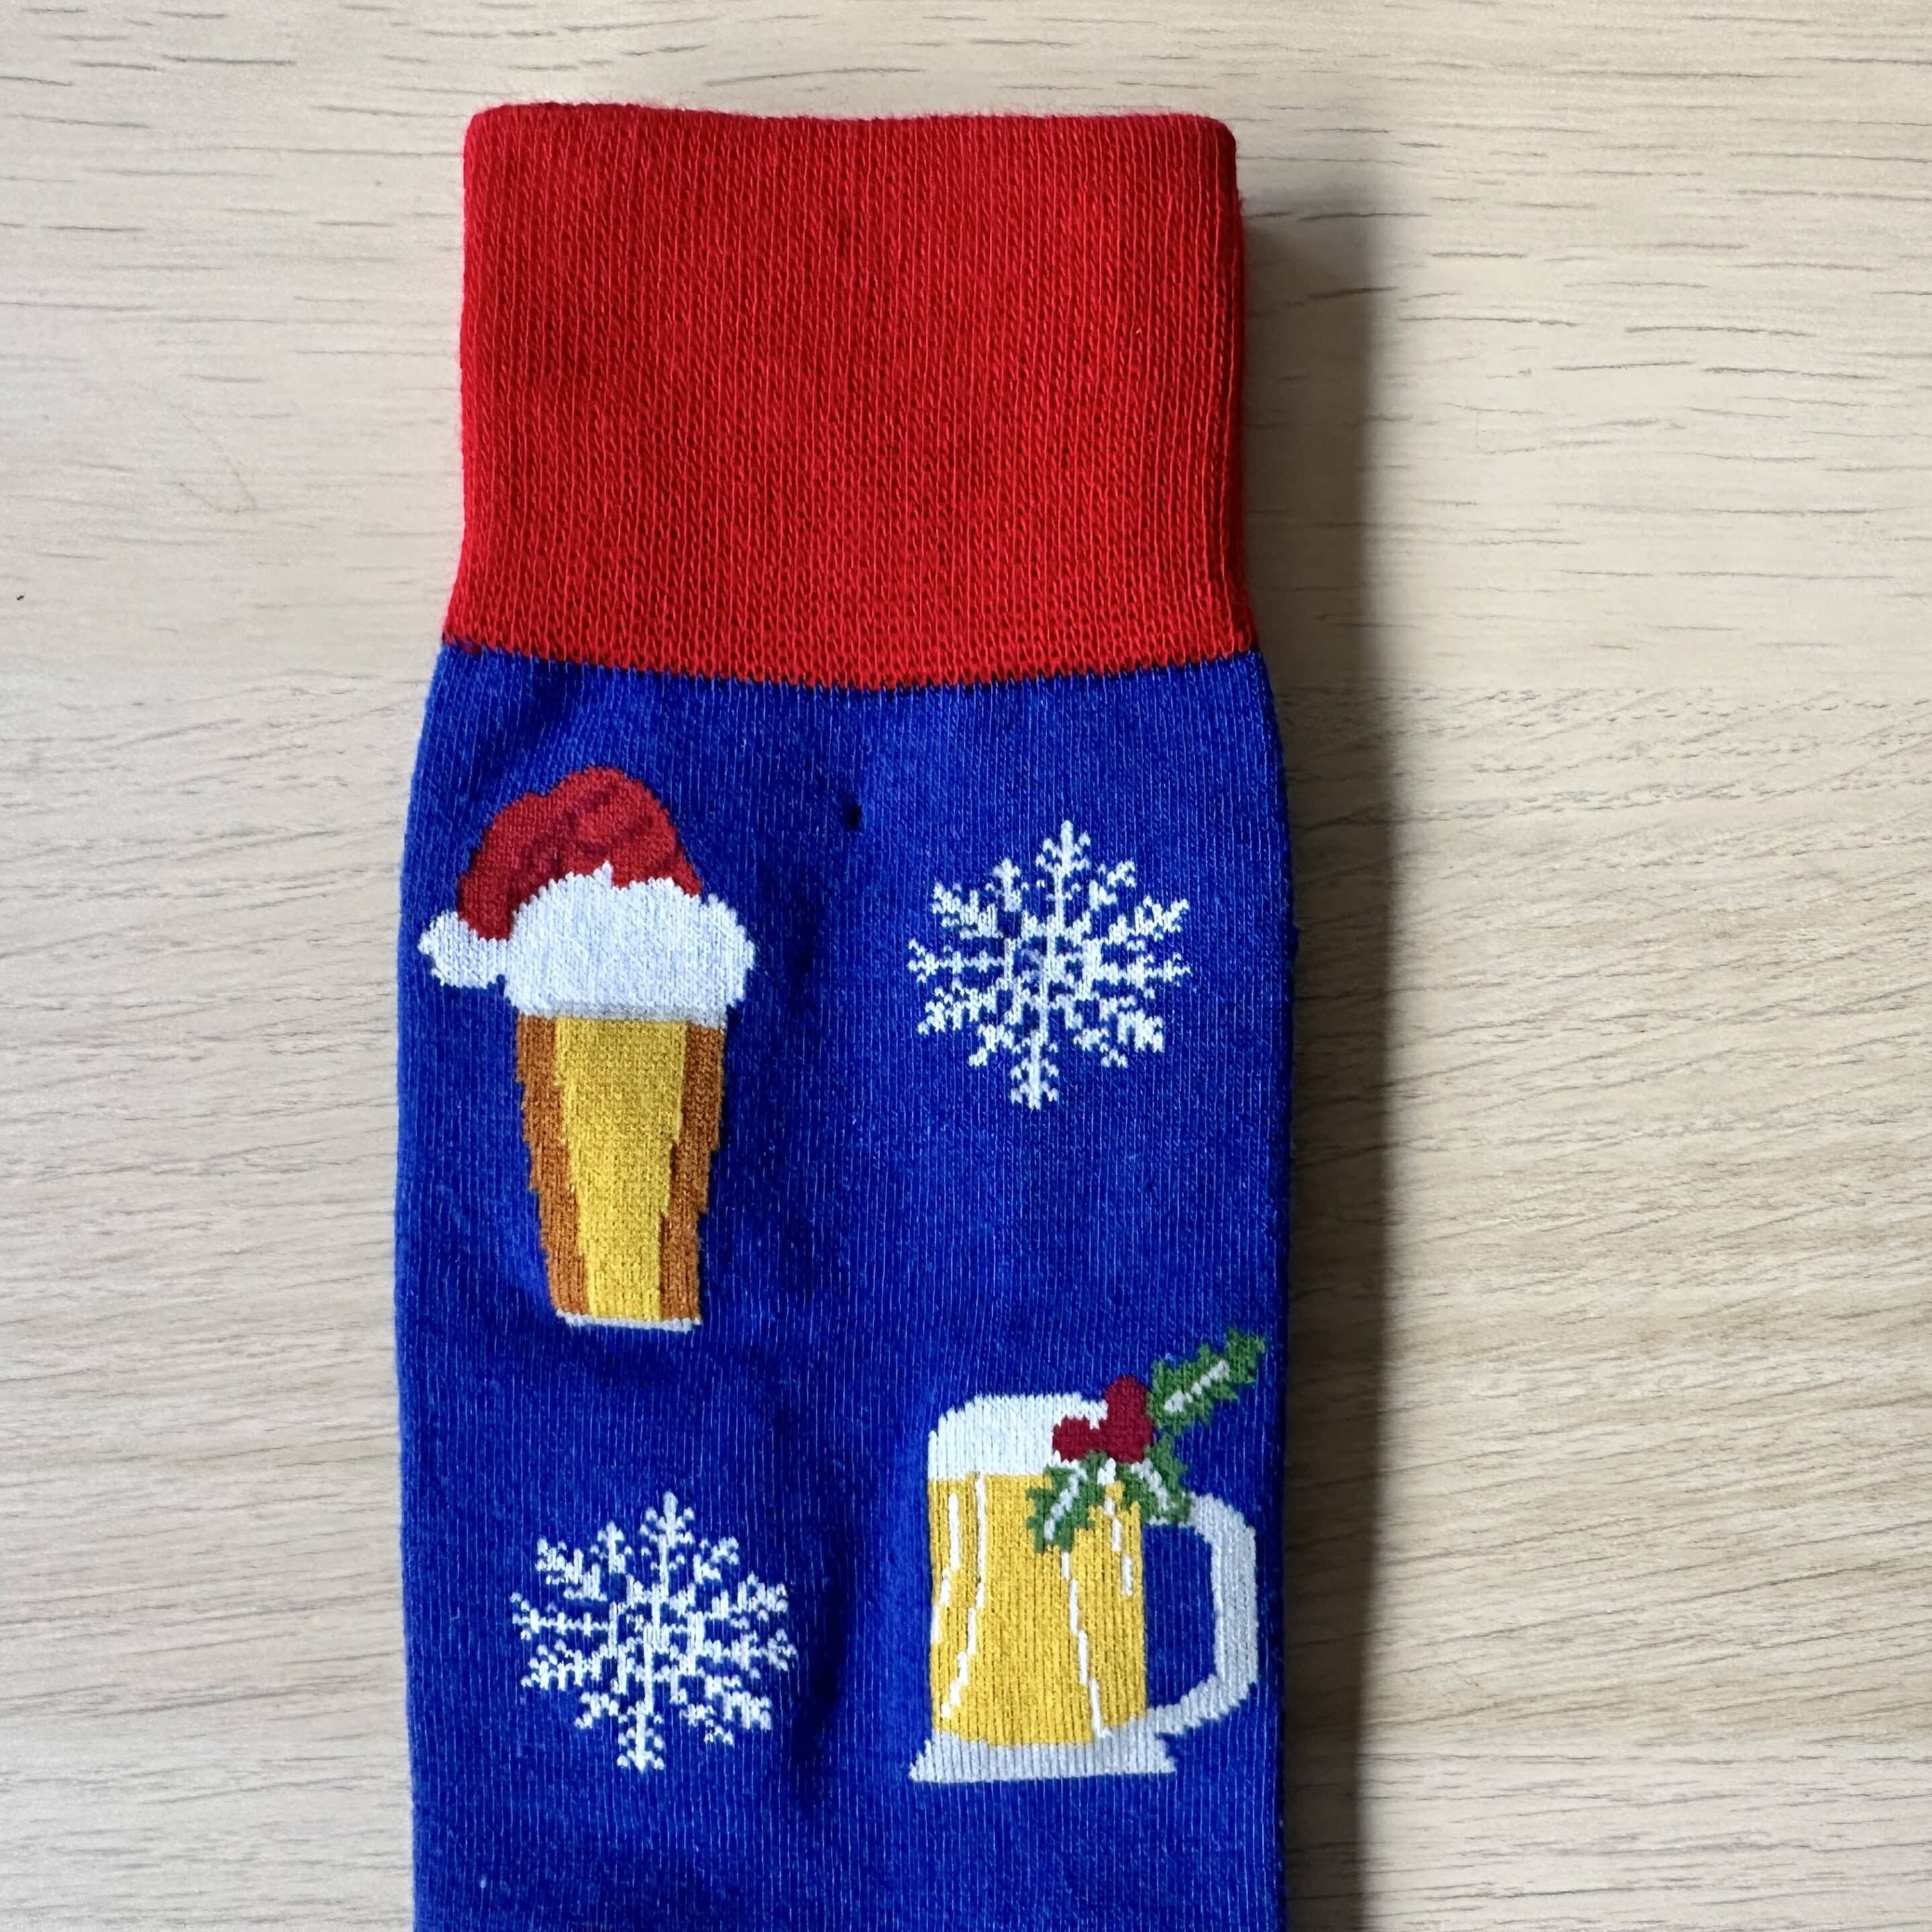 Sock Society Beer Socks - One and Every